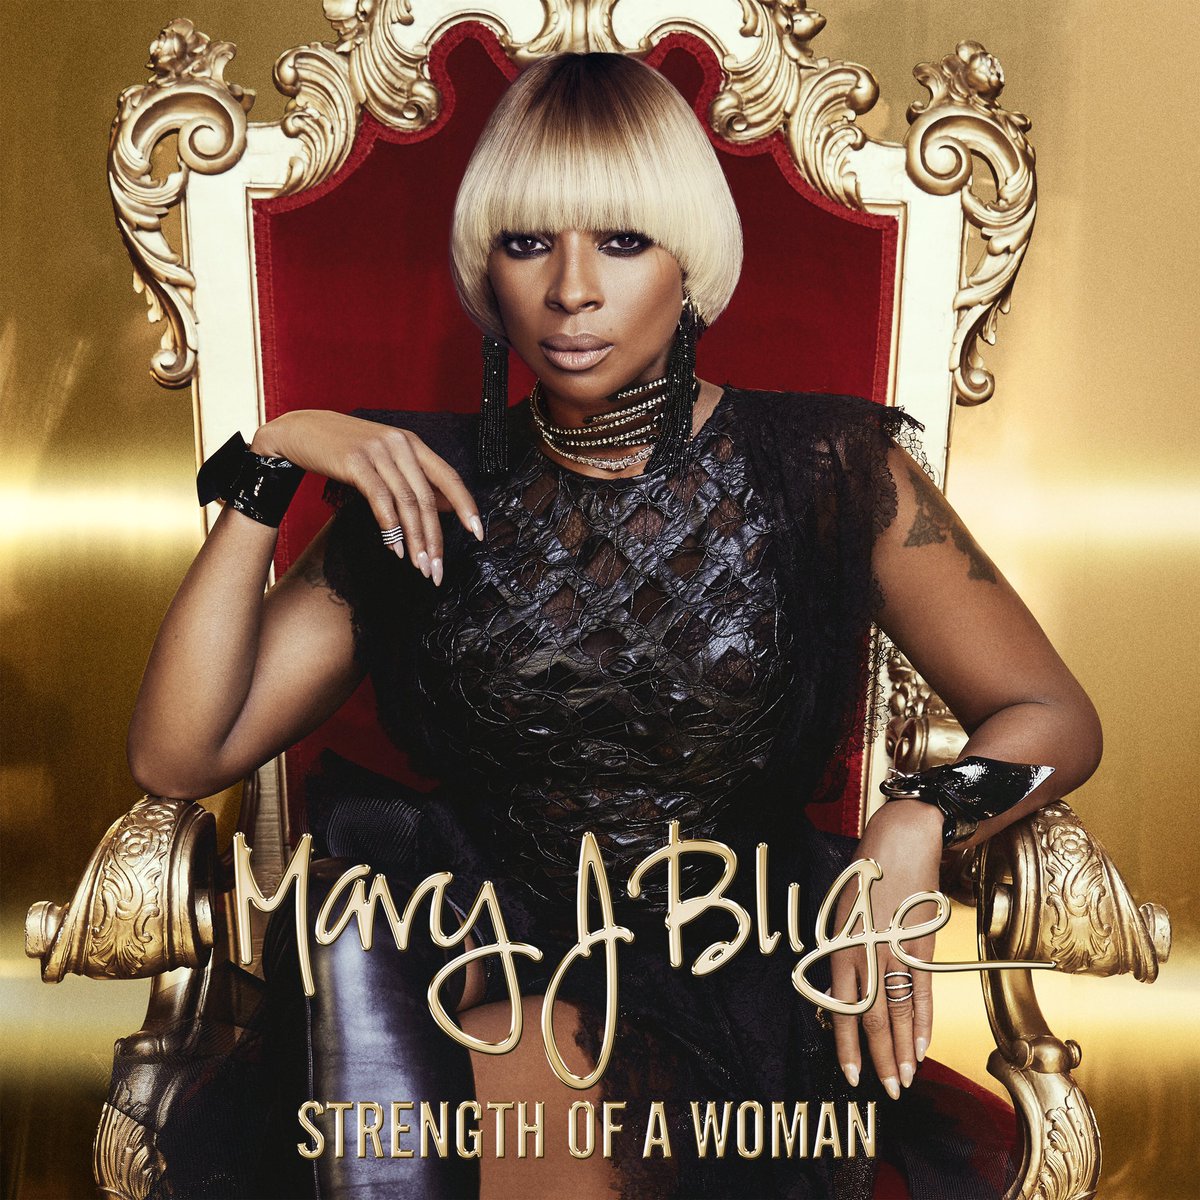 Congratulations to my sis @maryjblige on your inspirational album #StrengthofaWoman https://t.co/CDbpS5dagJ